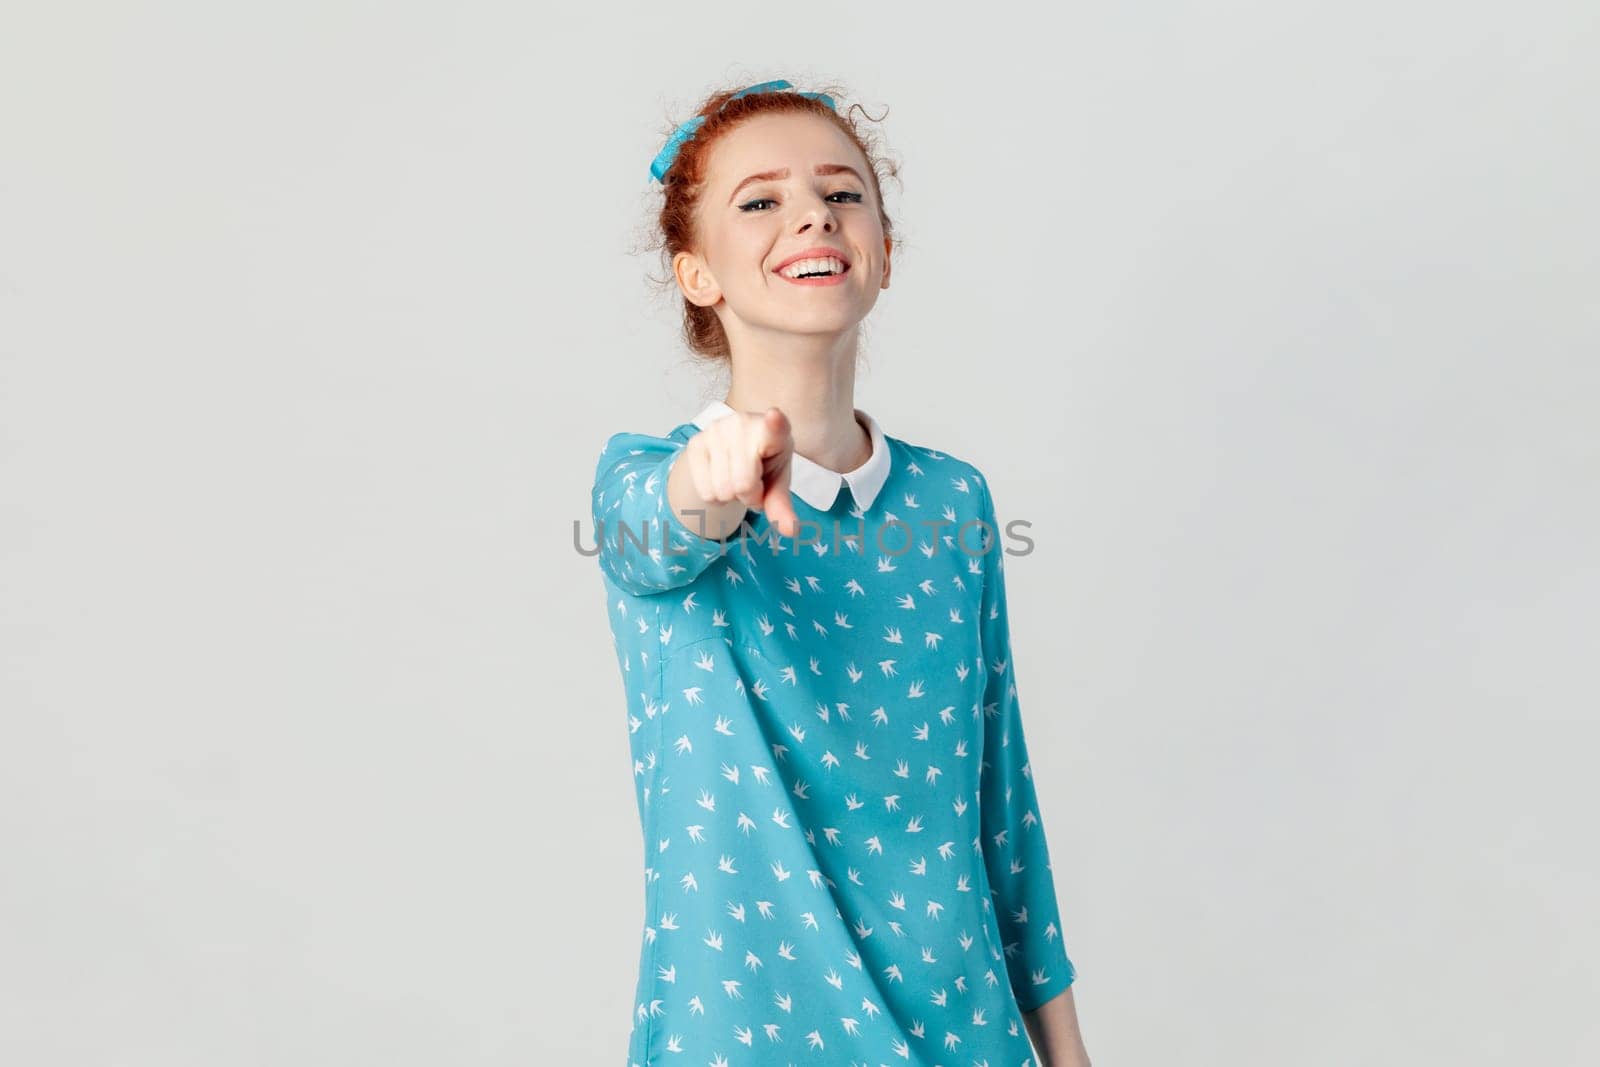 Portrait of joyful cheerful red haired woman with bun hairstyle, standing indicating at camera, choosing you, laughing, wearing blue dress. Indoor studio shot isolated on gray background.